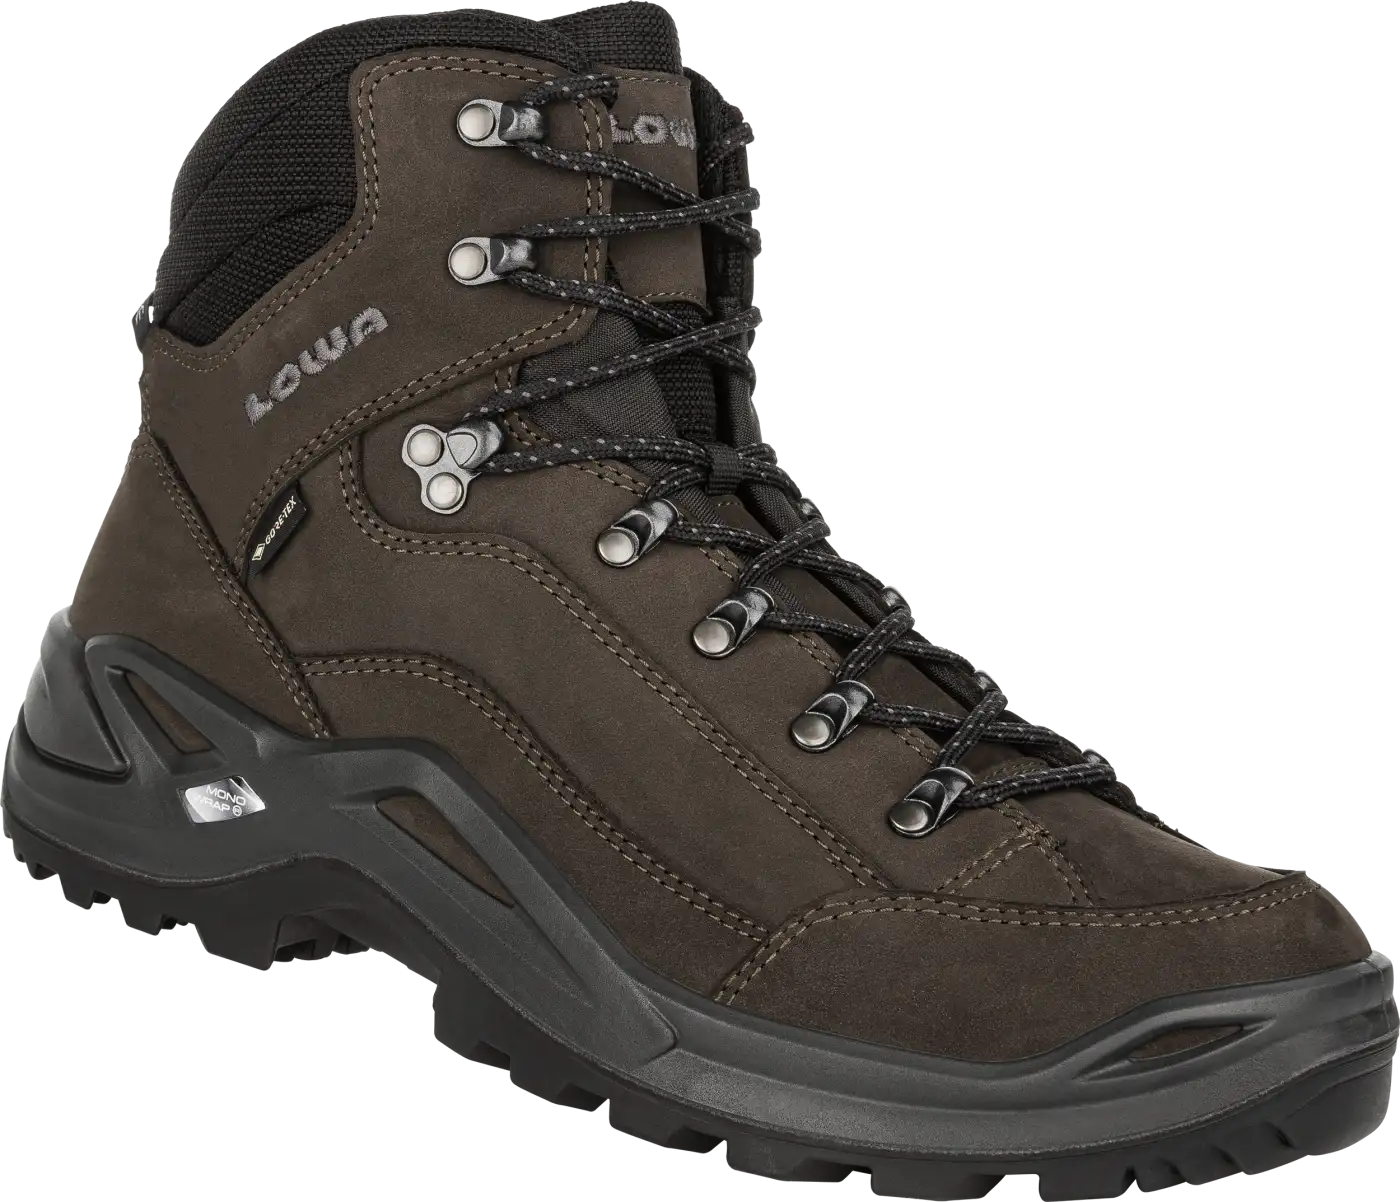 Buty LOWA Renegade GTX mid 310945 4309_renegade gtx mid_2021_outer rotatsed